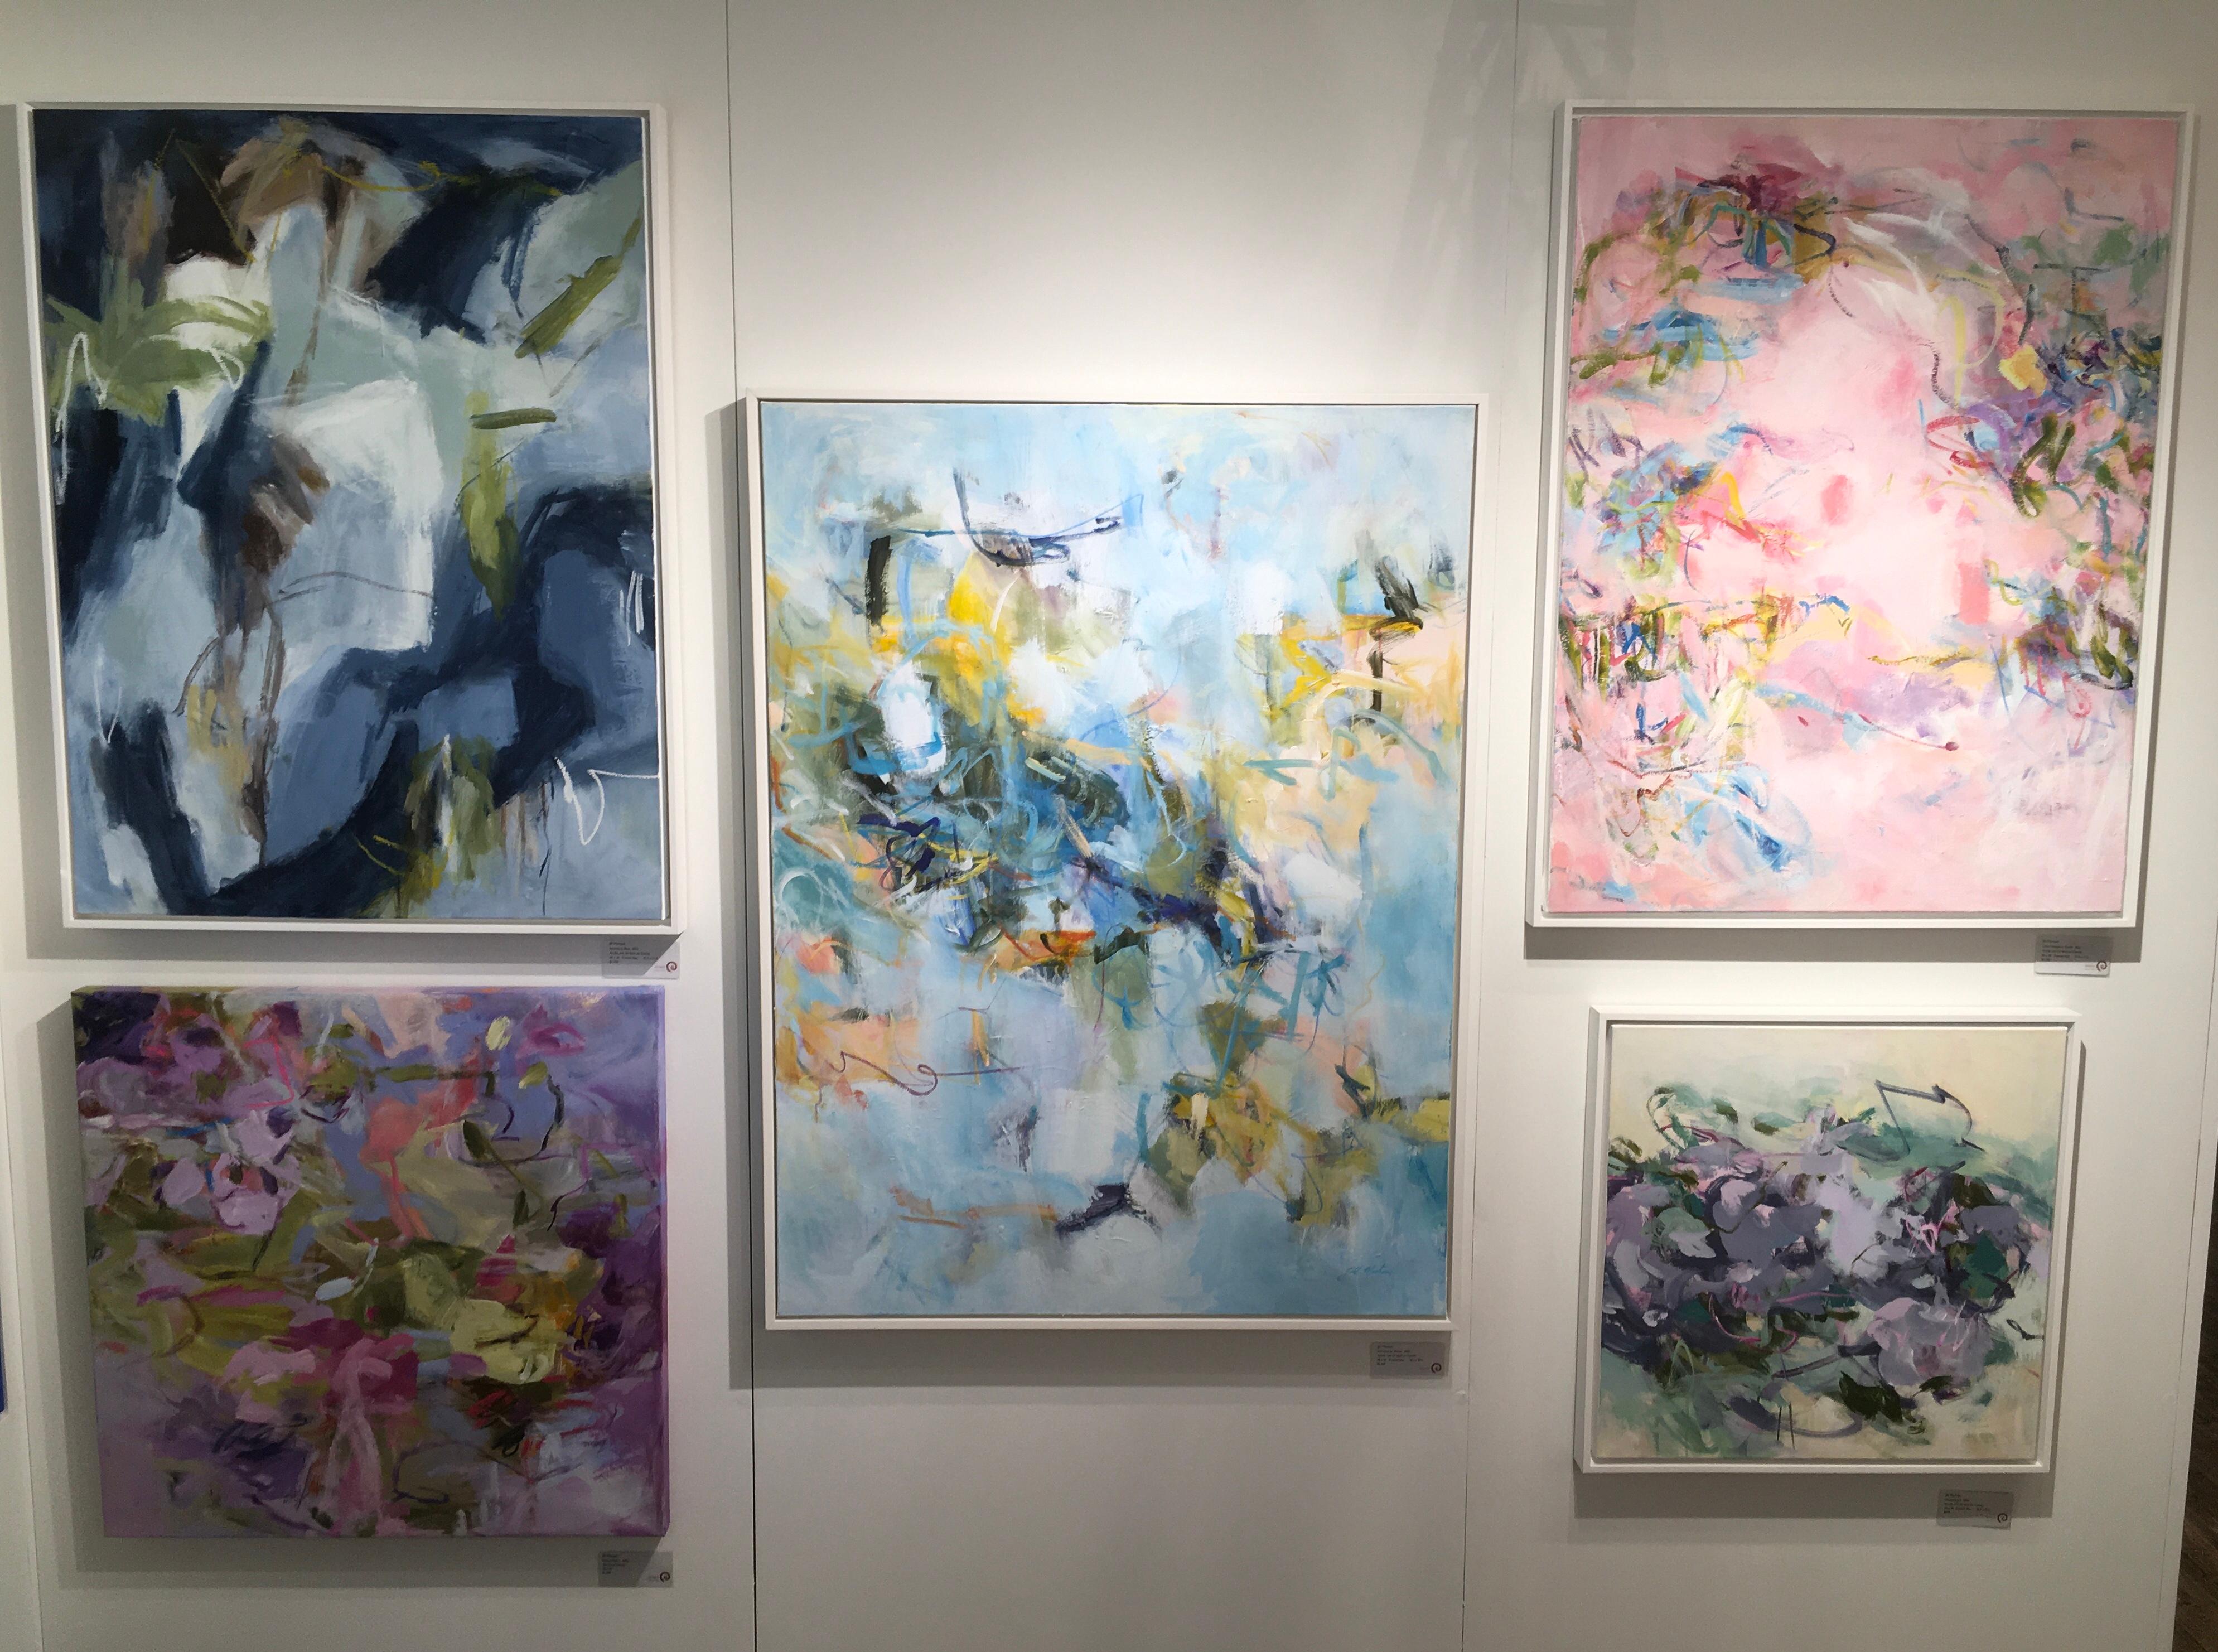 Close Enough to Touch is an abstract painting filled with pink, white and blue by Australian artist, Jill Morton.  It is 40 x 30, acrylic and oil stick on canvas.  It is framed with a white float frame.

According to Morton, 